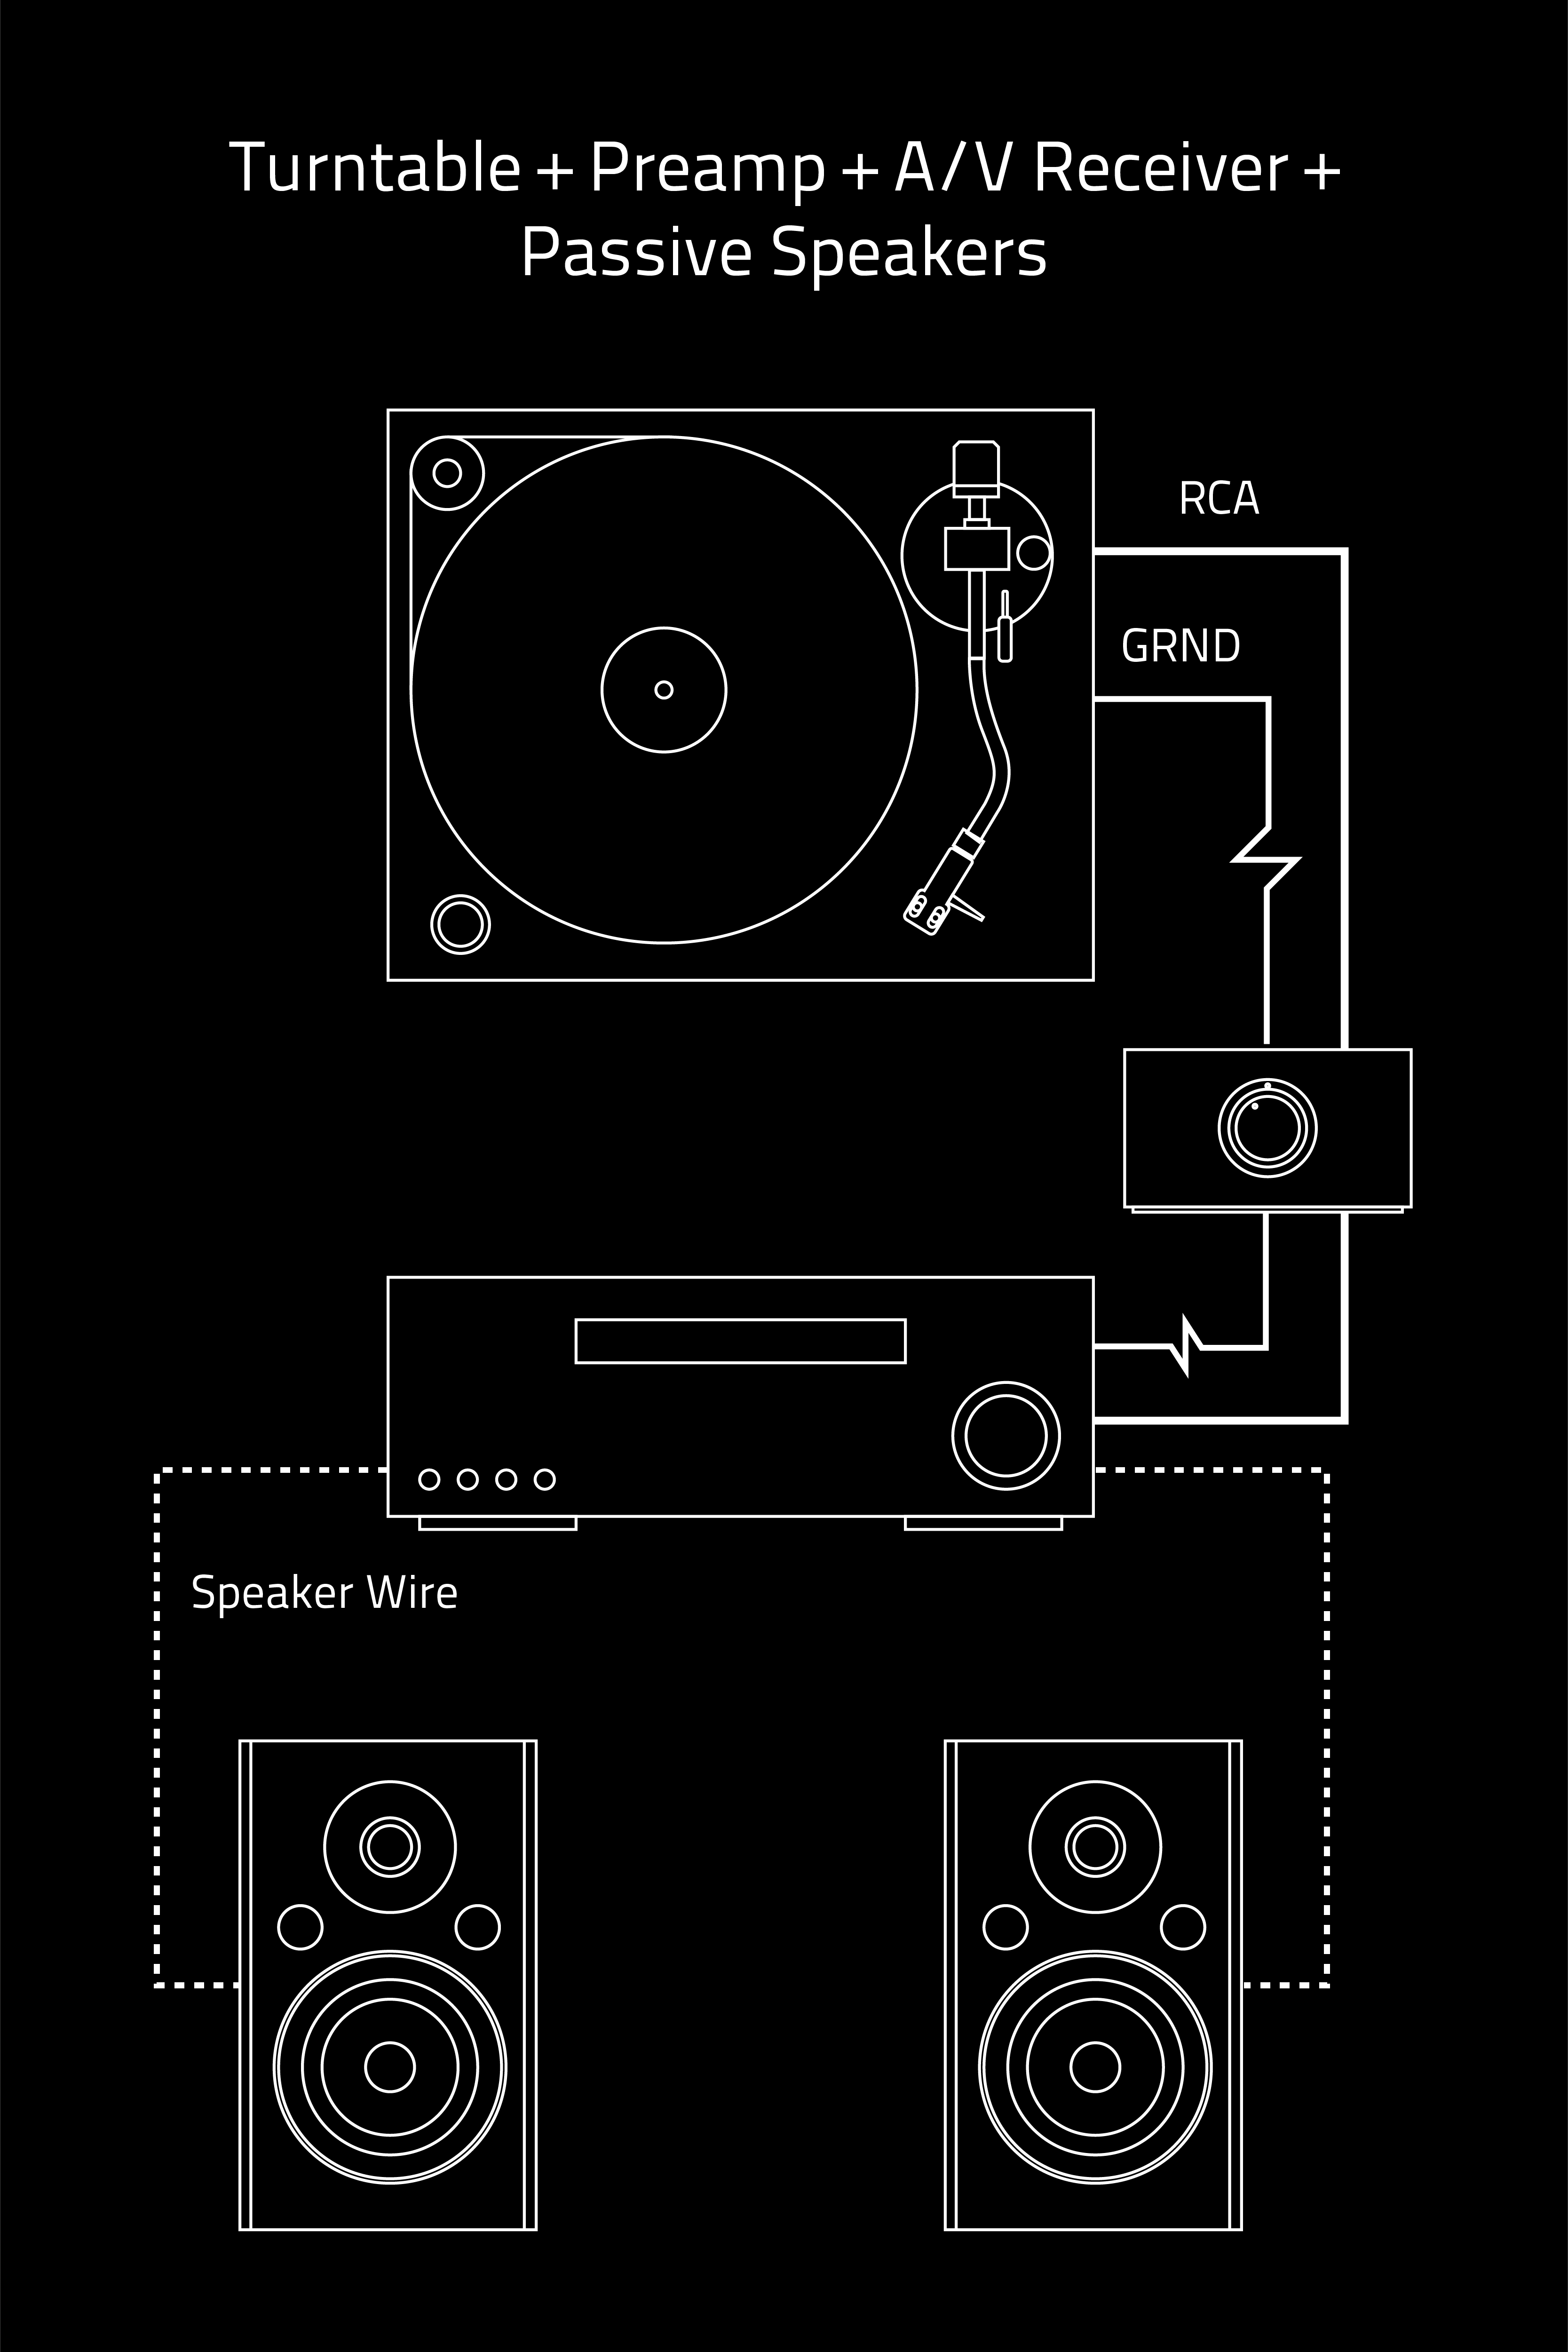 rca speakers for turntable